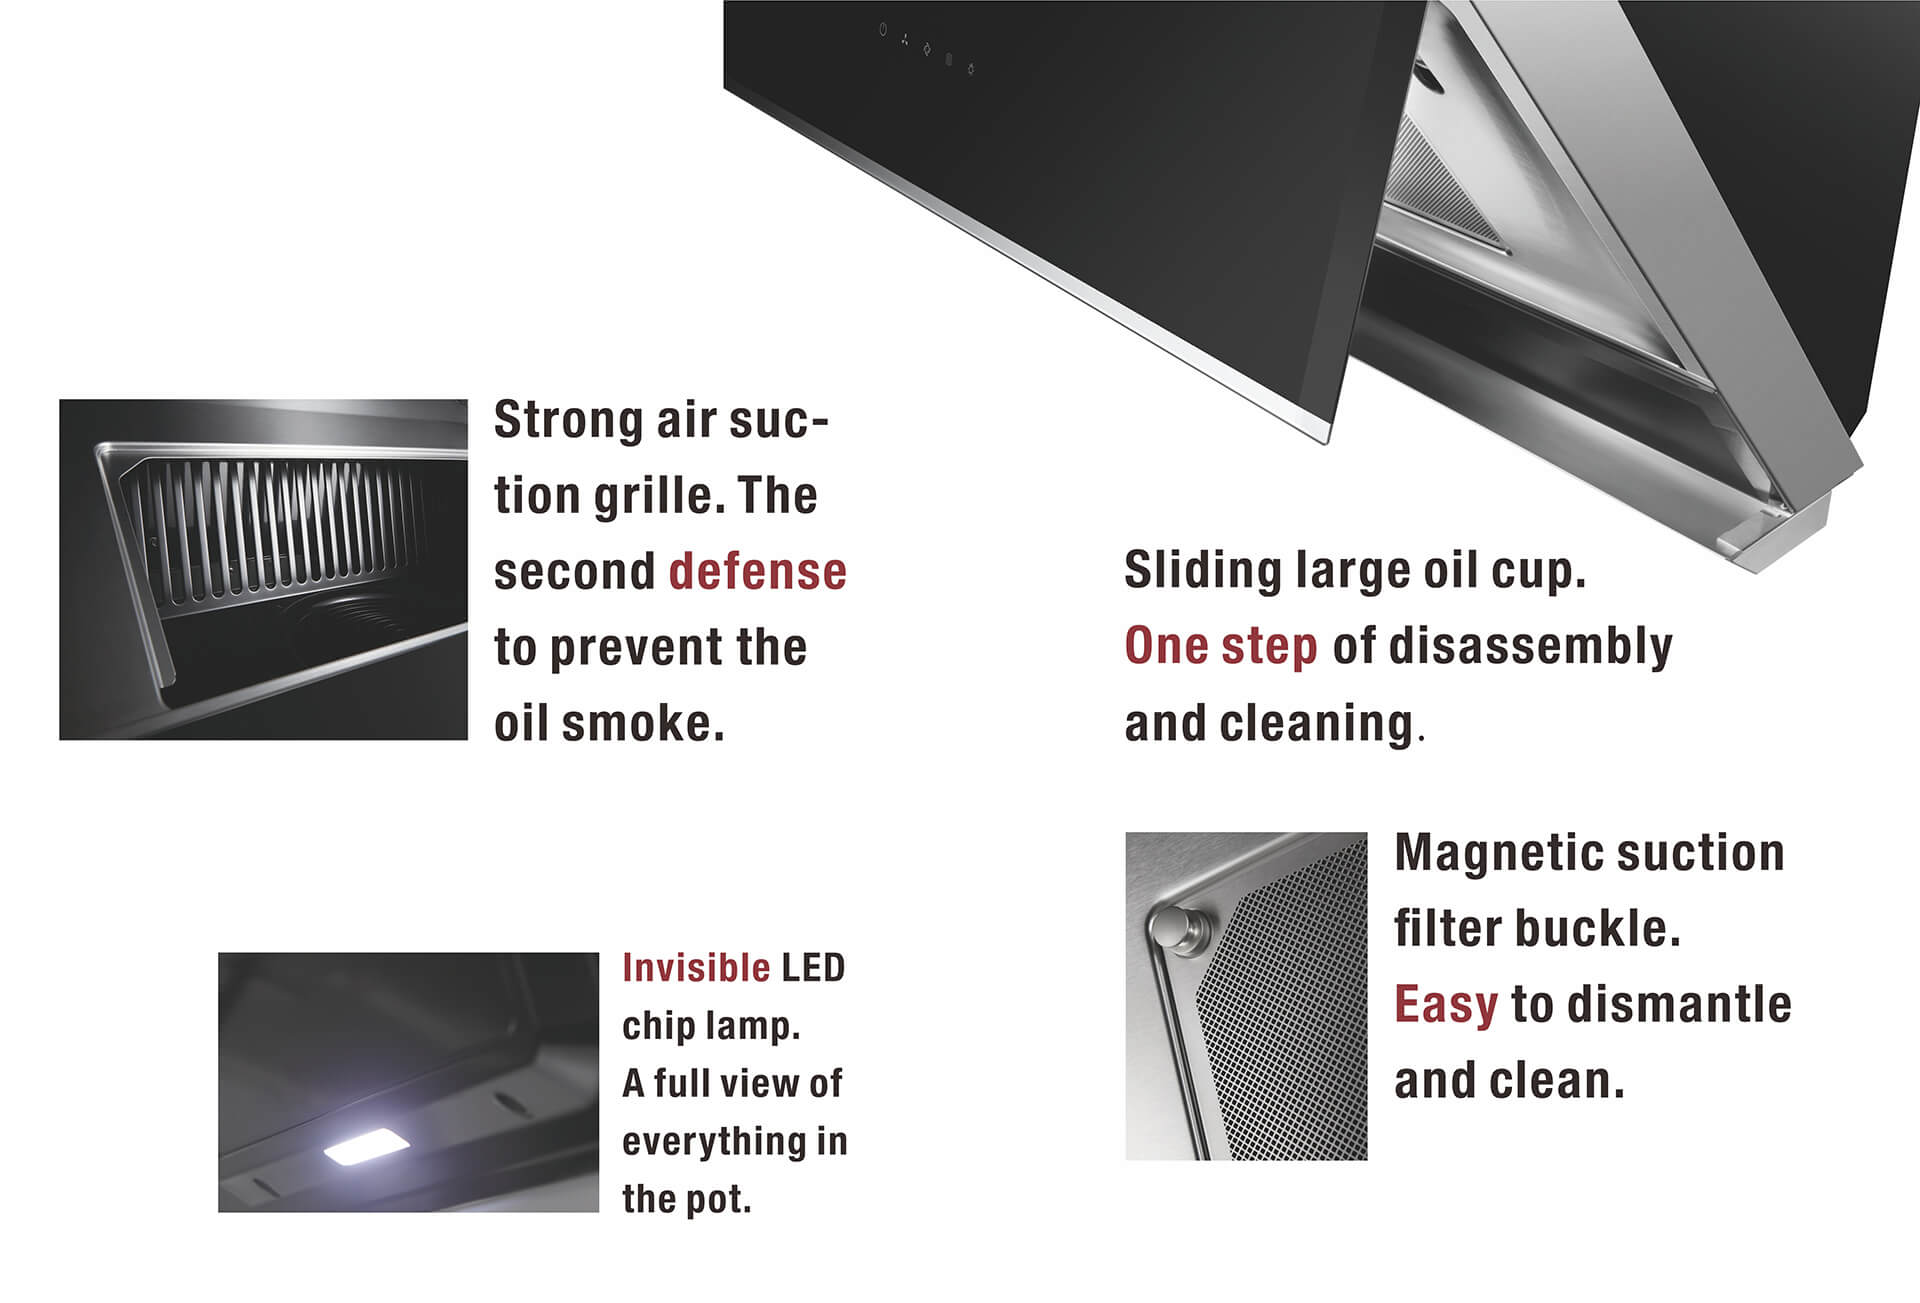 ● The second defense to prevent the oil smoke<<br /> ● Invisible LED chip lamp